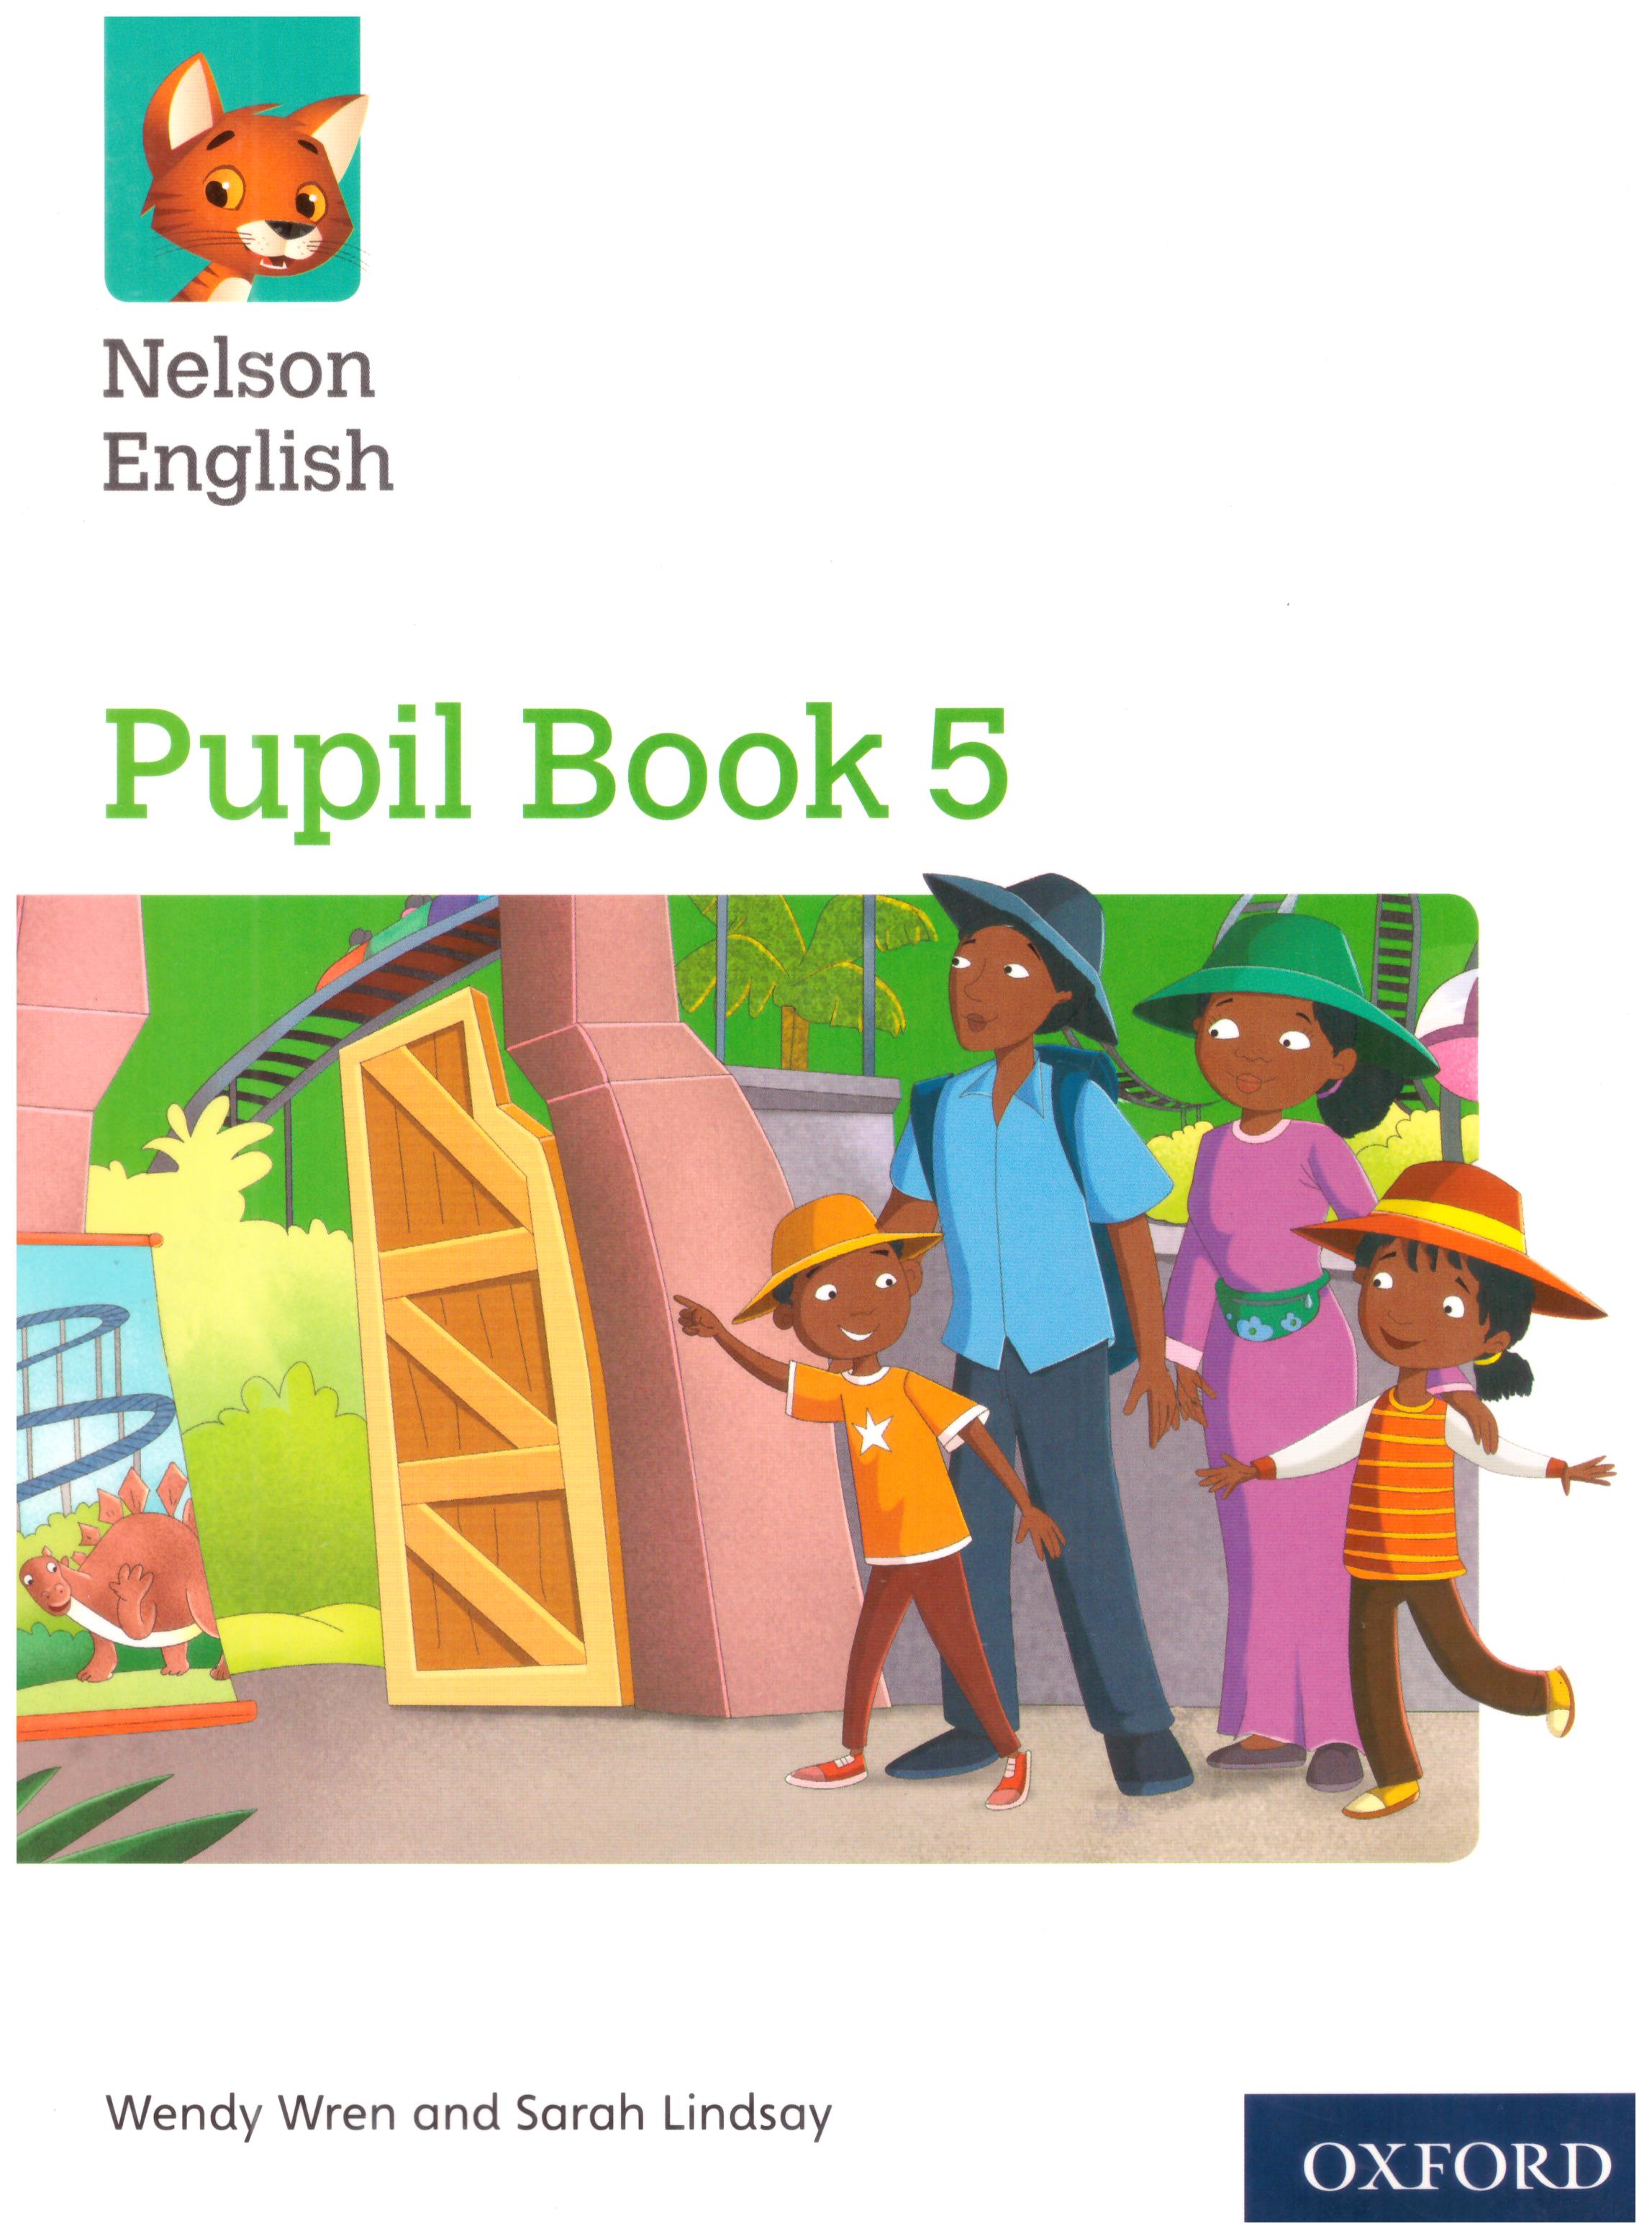 Nelson English - Pupil Book 5 